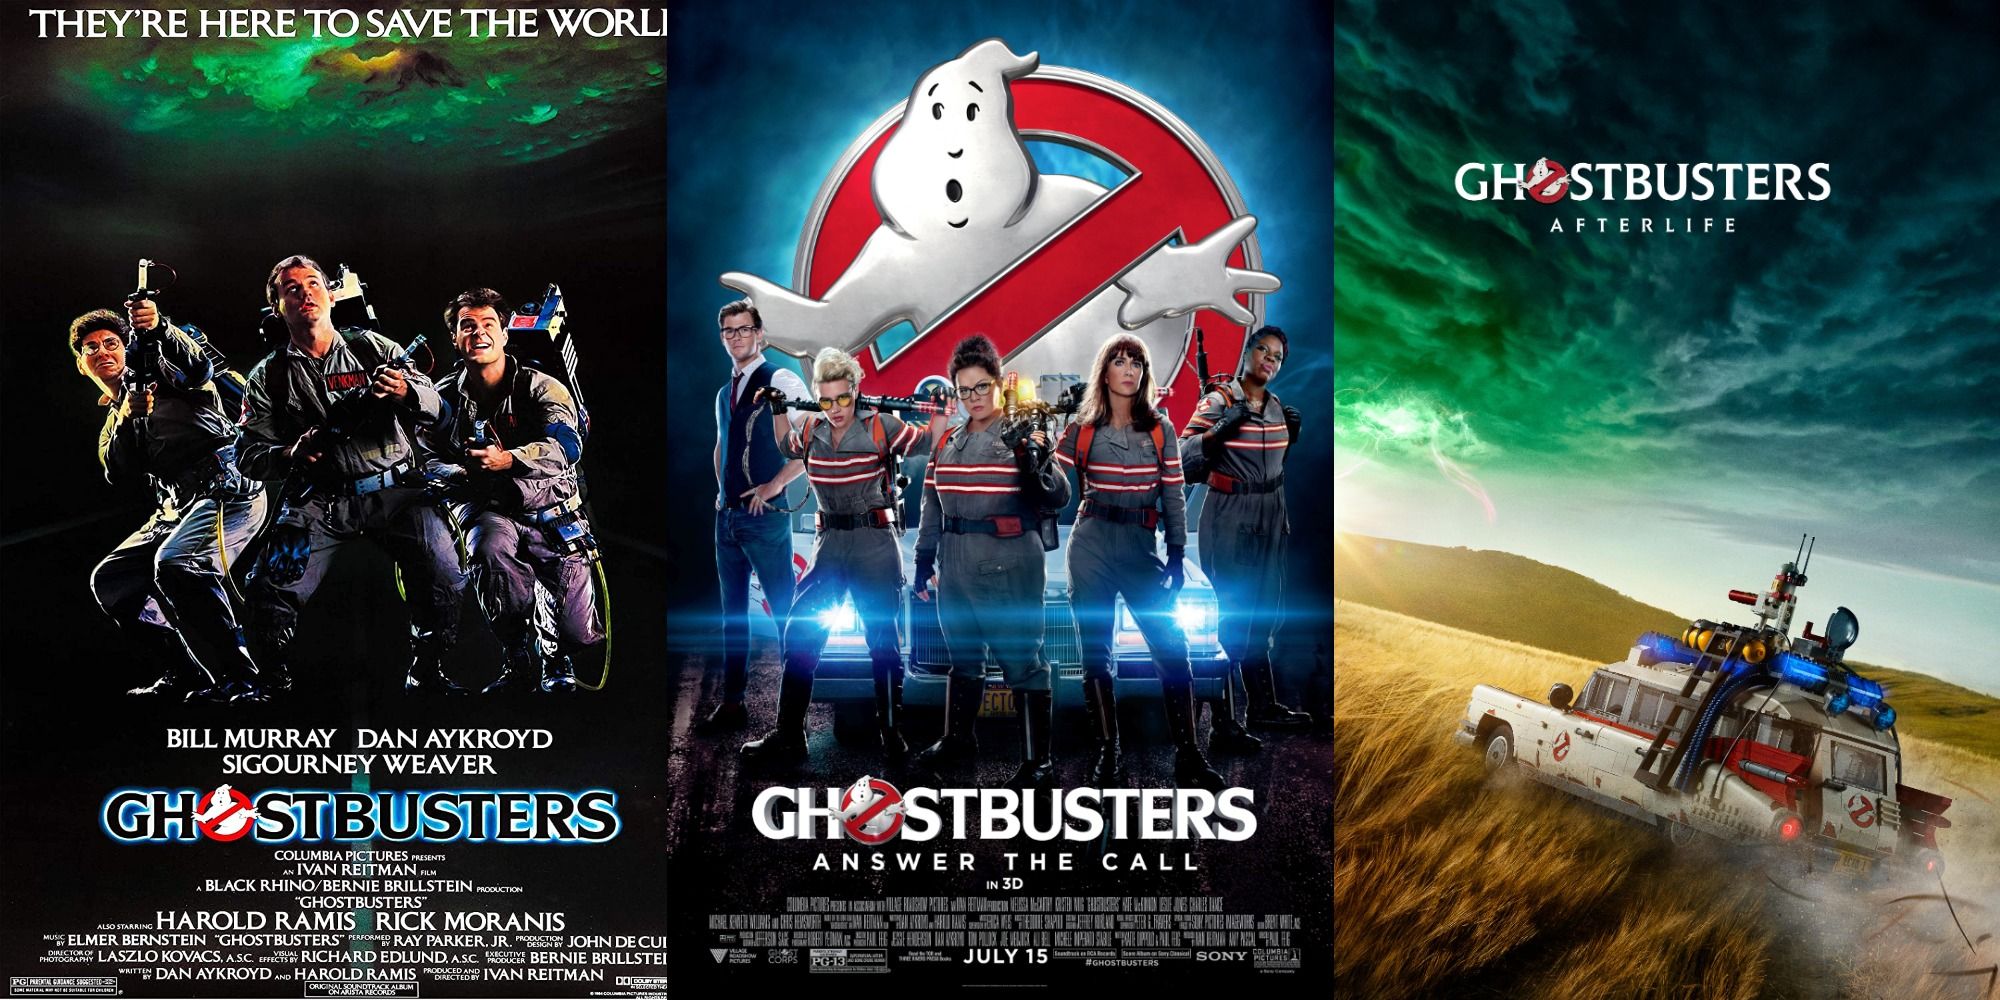 combined posters for Ghostbusters 1, 2016 reboot and Afterlife featuring male and female teams